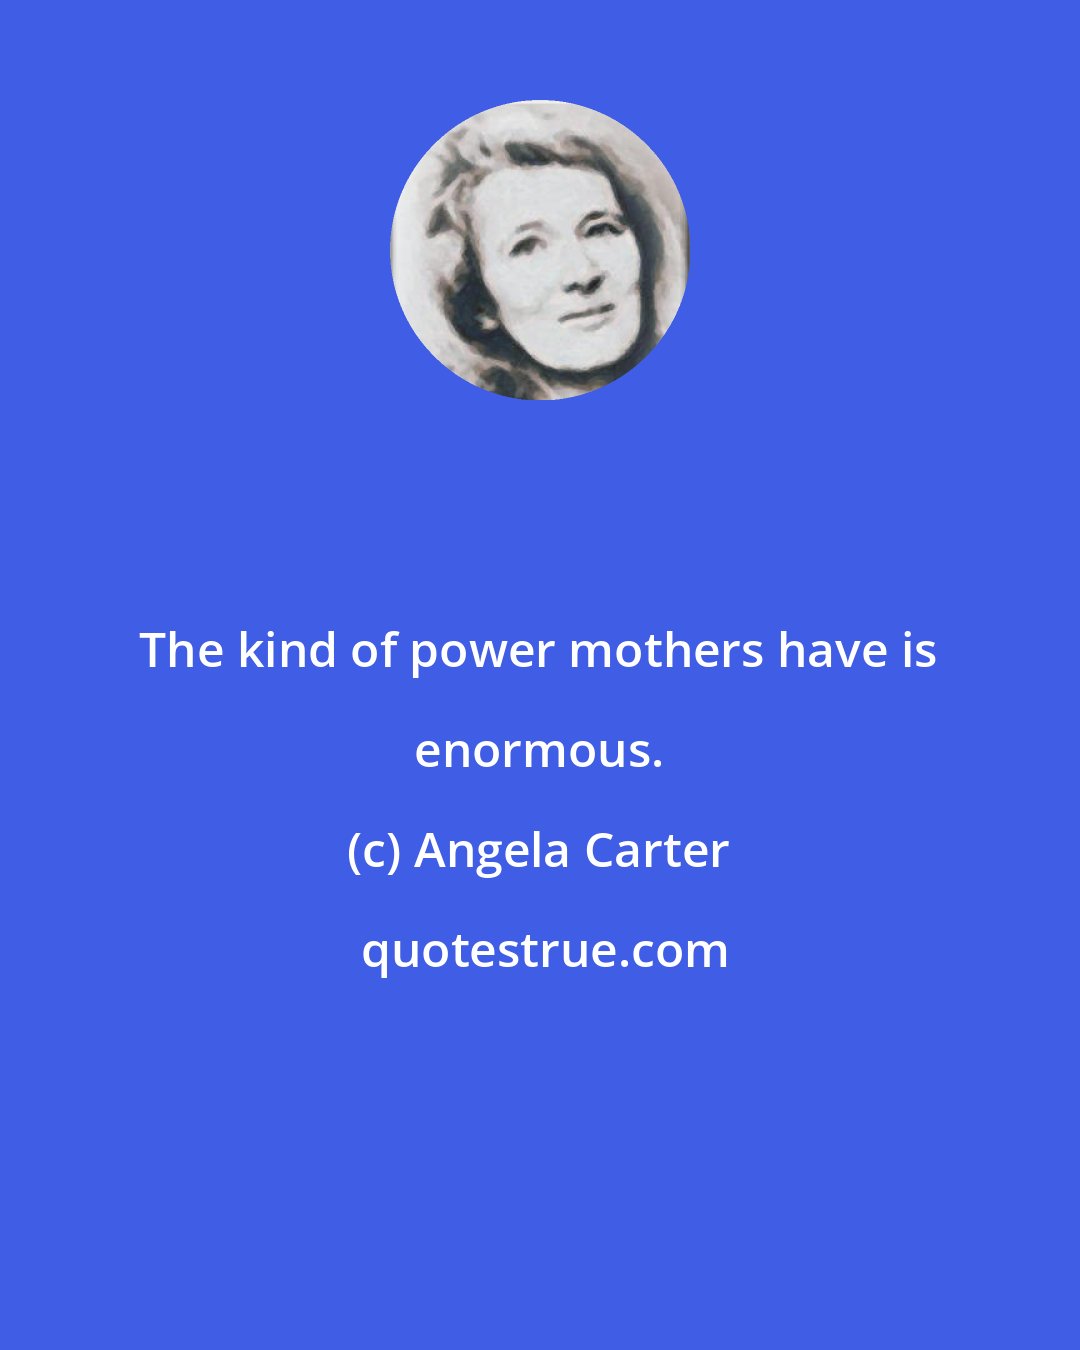 Angela Carter: The kind of power mothers have is enormous.